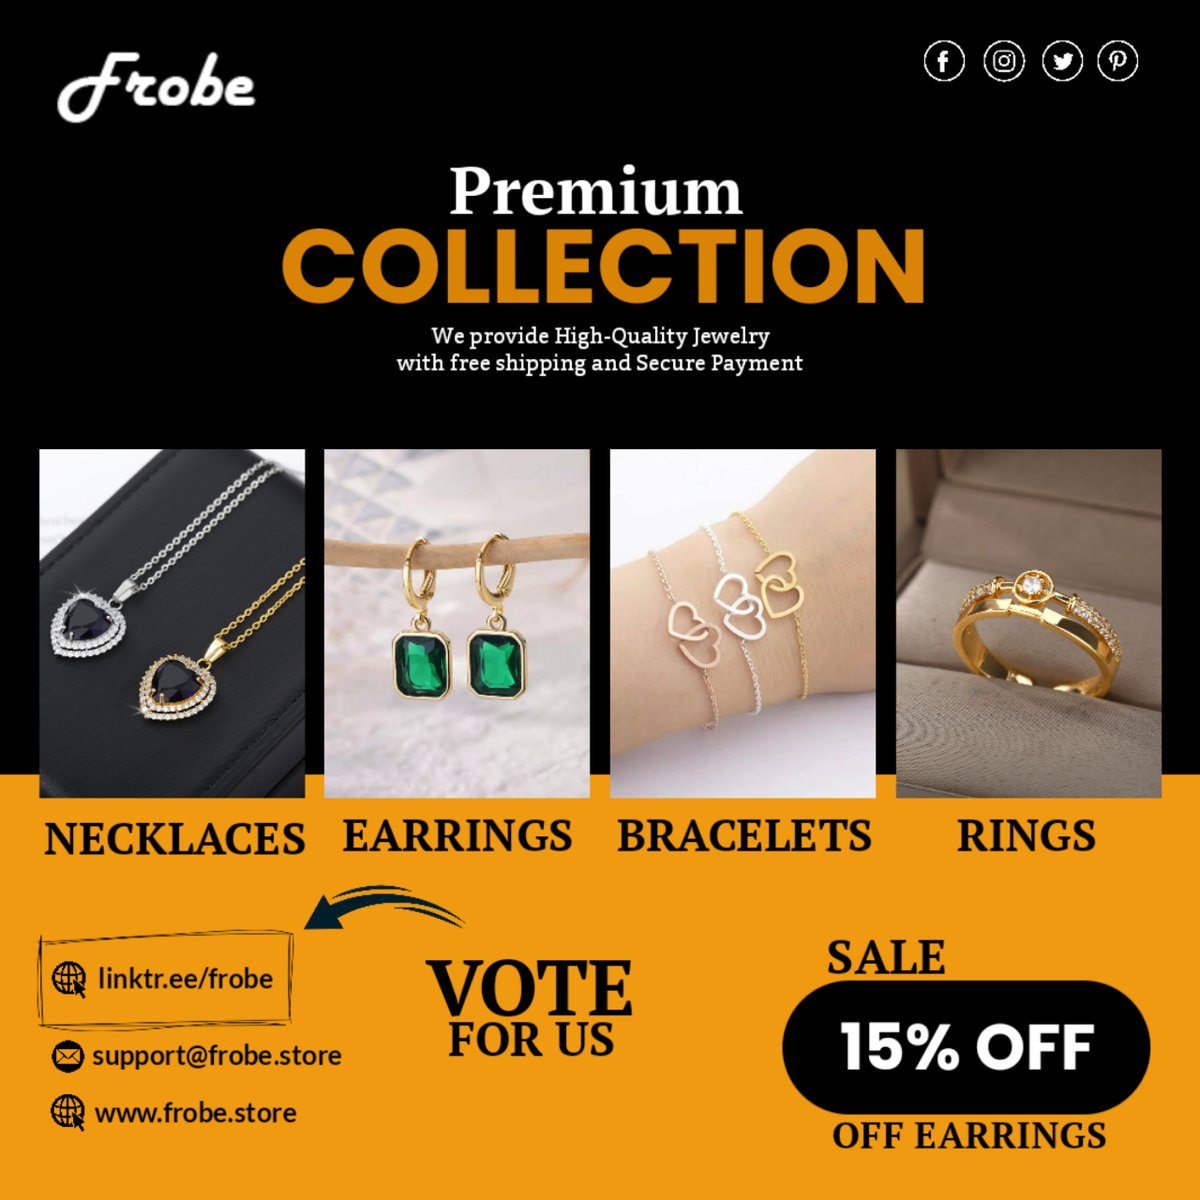 Don't miss out our #uniquejewelry.
Follow us at our channels linktr.ee/frobe
and see our collection at frobe.store

#onlineshopping #onlinejewelry #onlinejewelrystore #onlinestore #onlineshop #jewelryonline #jewelrybusiness #freeshipping #freeshippingjewelry